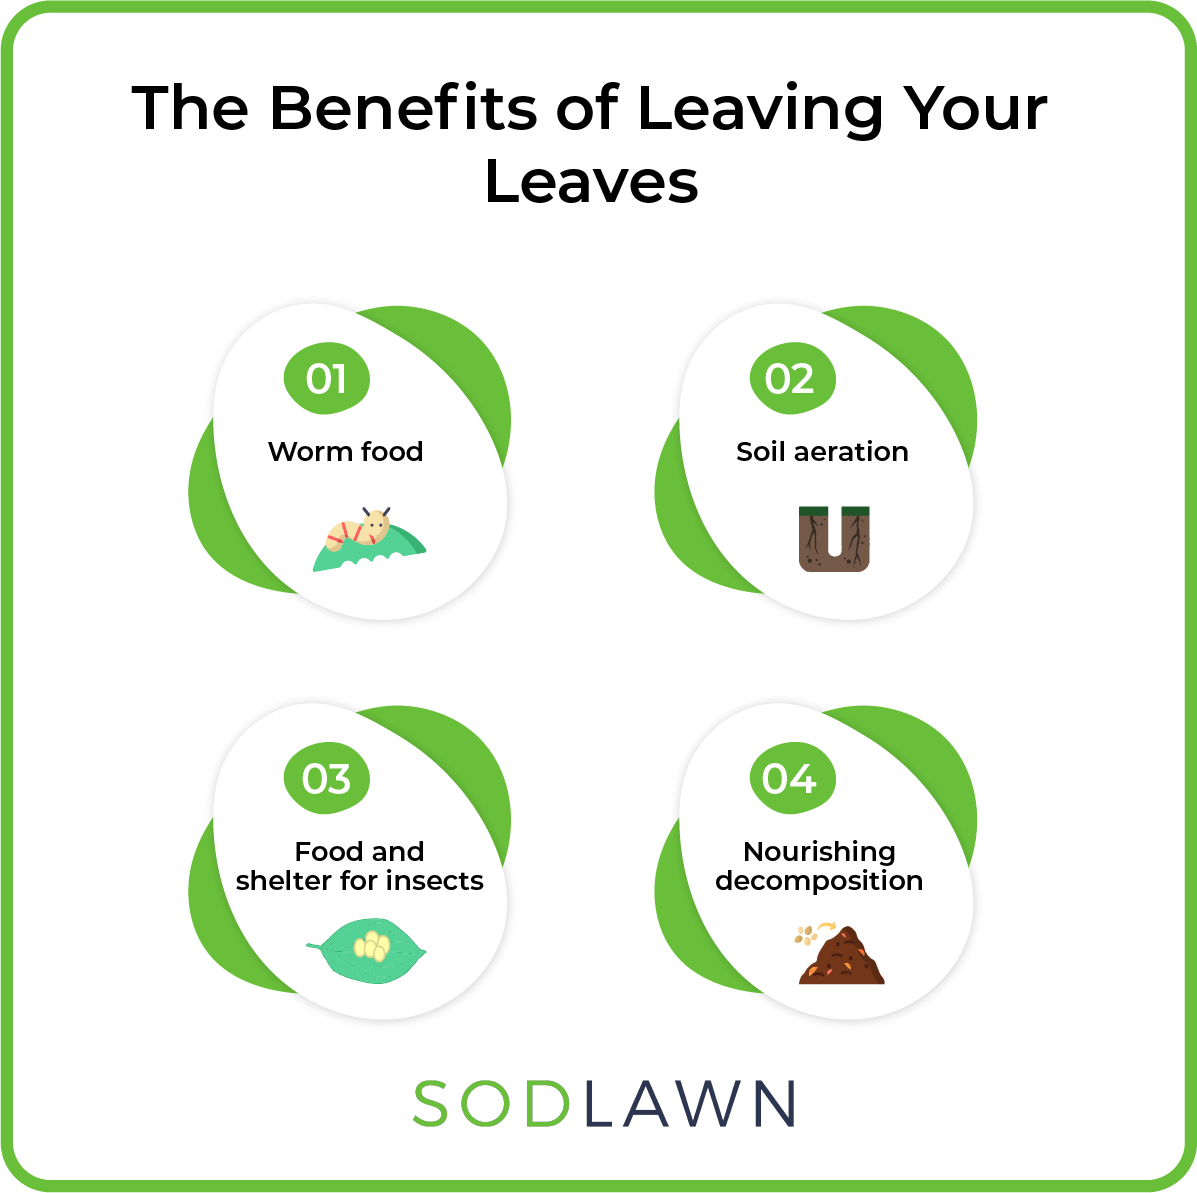 The benefits of leaving your leaves